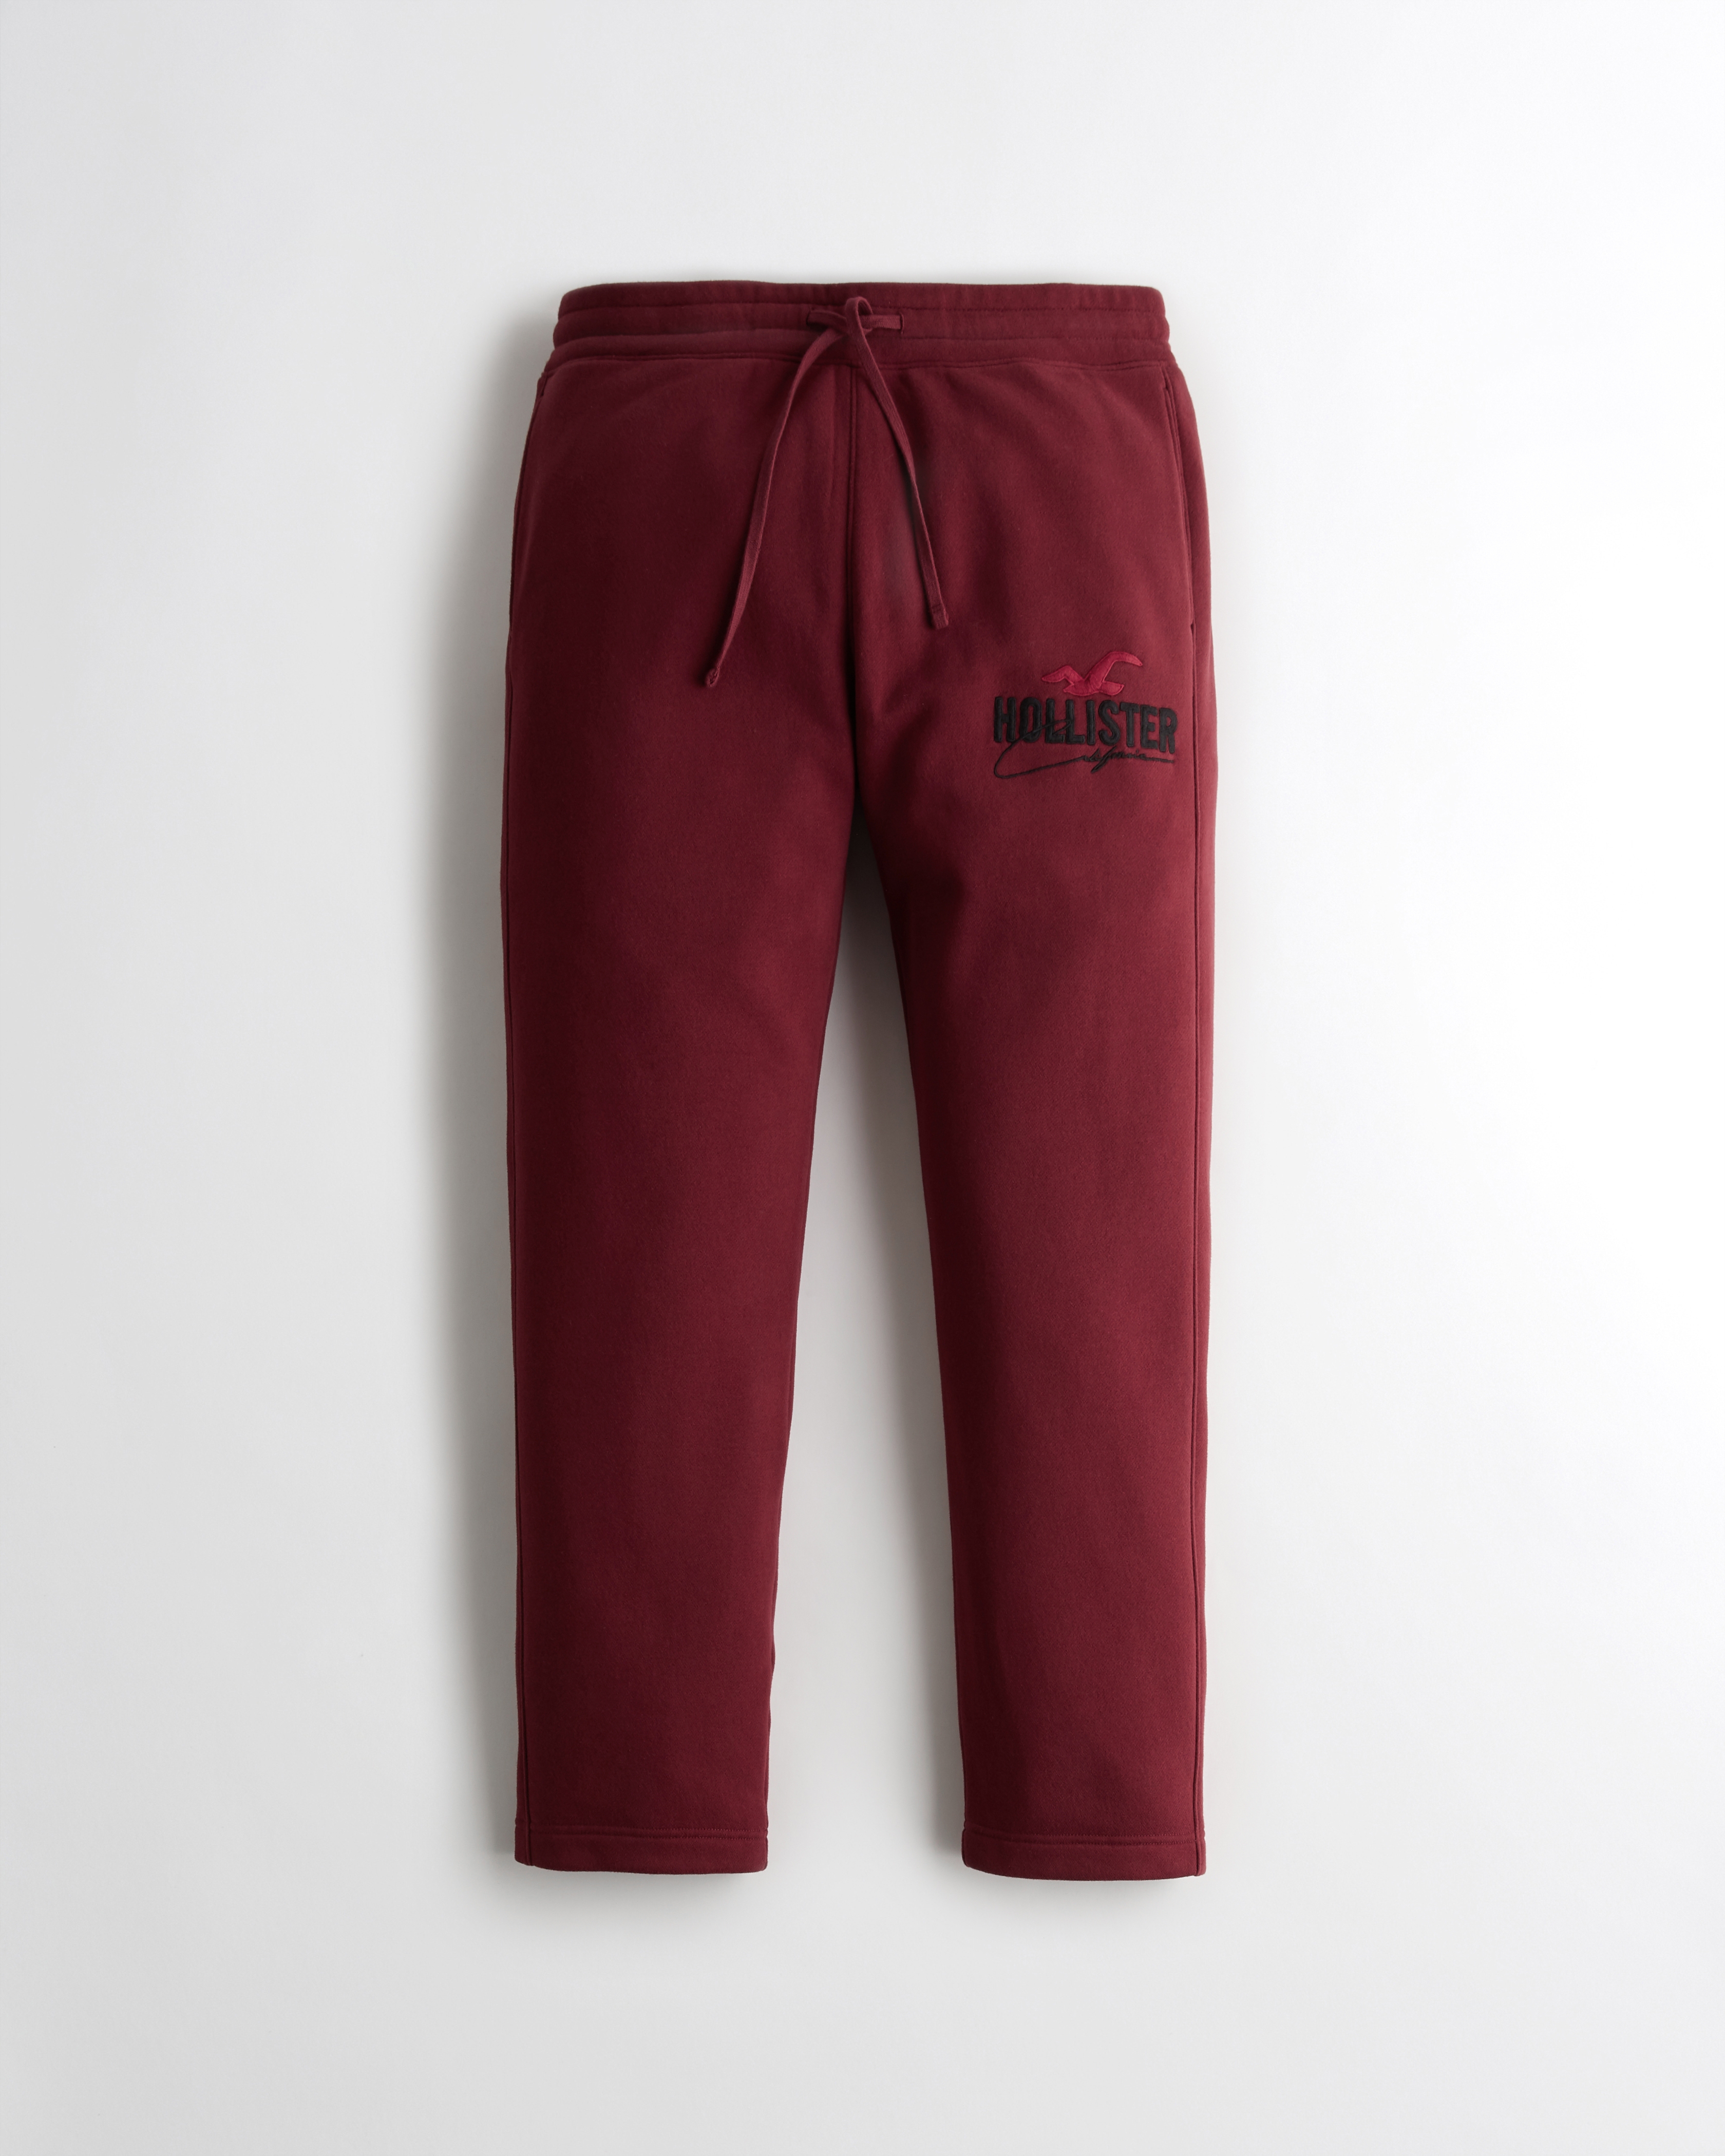 Hollister Embroidered Logo Graphic Sweatpants